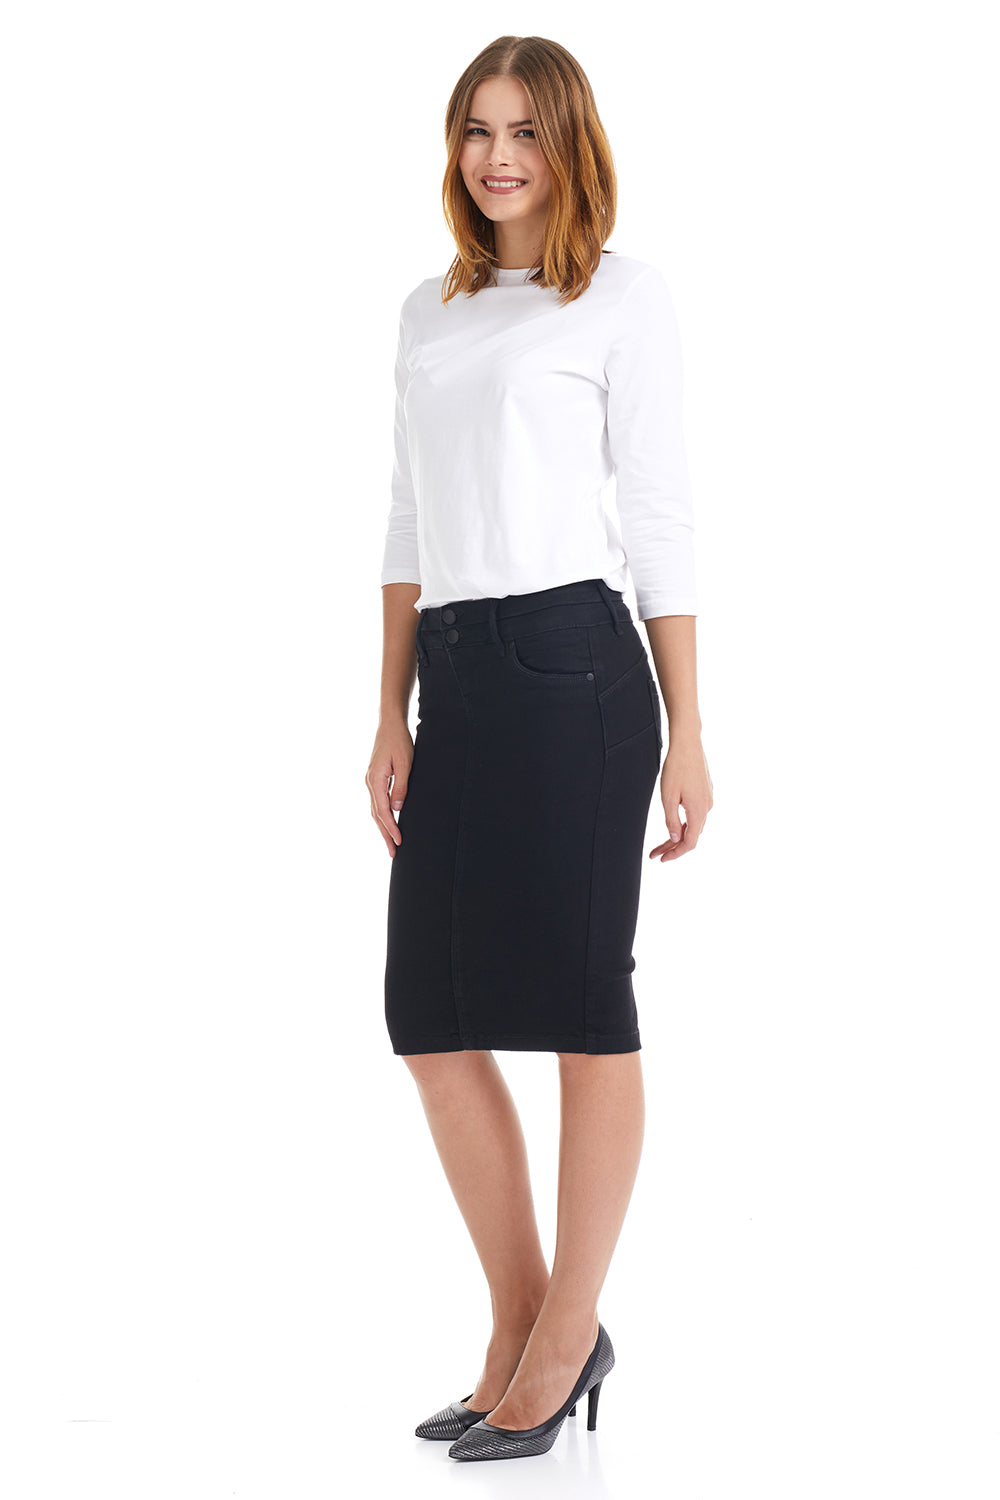 black denim pencil skirt with 2-button and zipper closure with small back slit